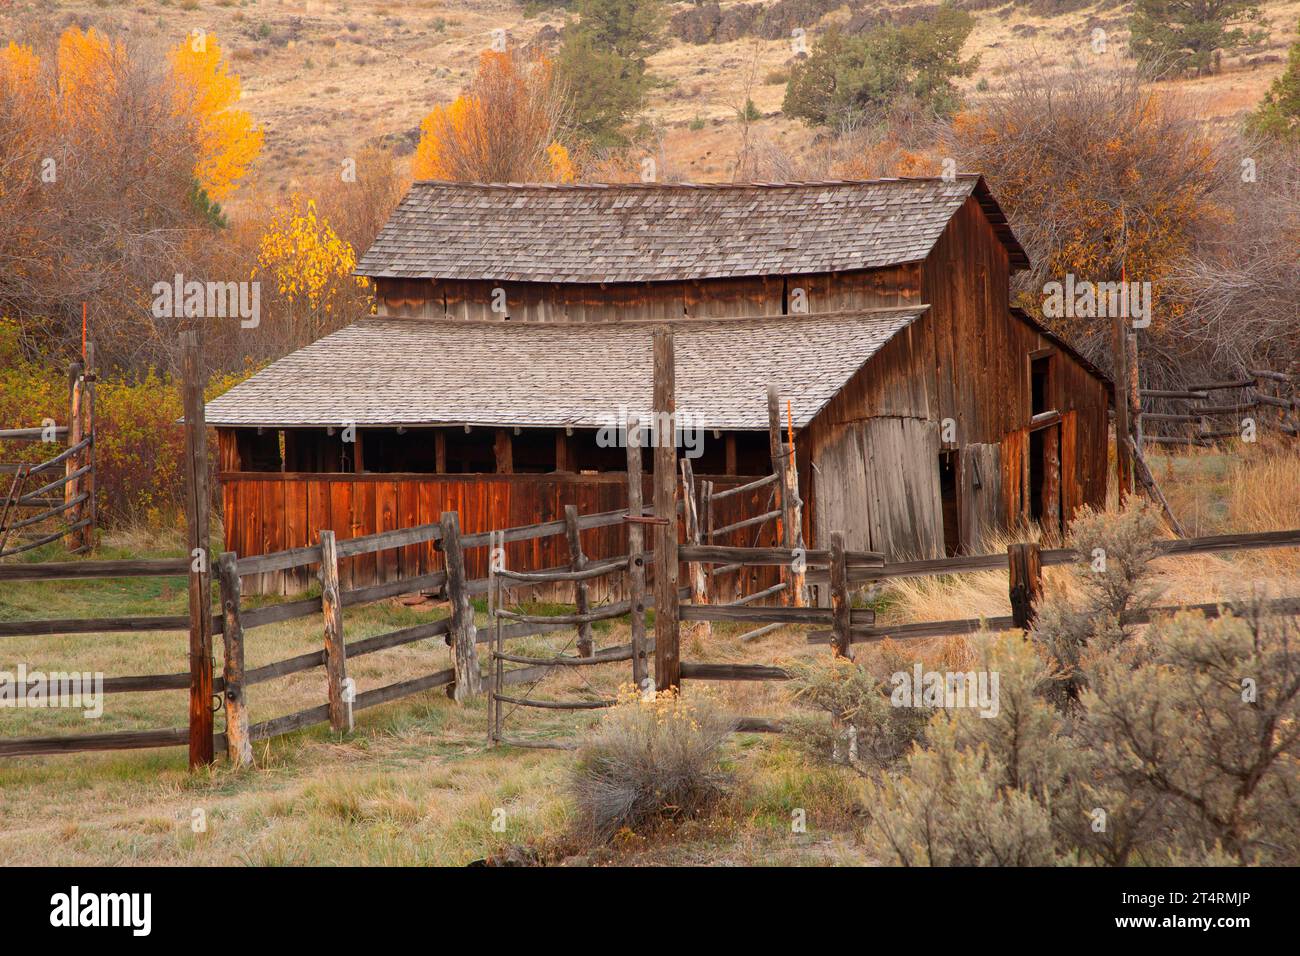 Barn, Donner und Blitzen Wild and Scenic River, Steens Mountain Cooperative Management and Protection Area, Oregon Stock Photo